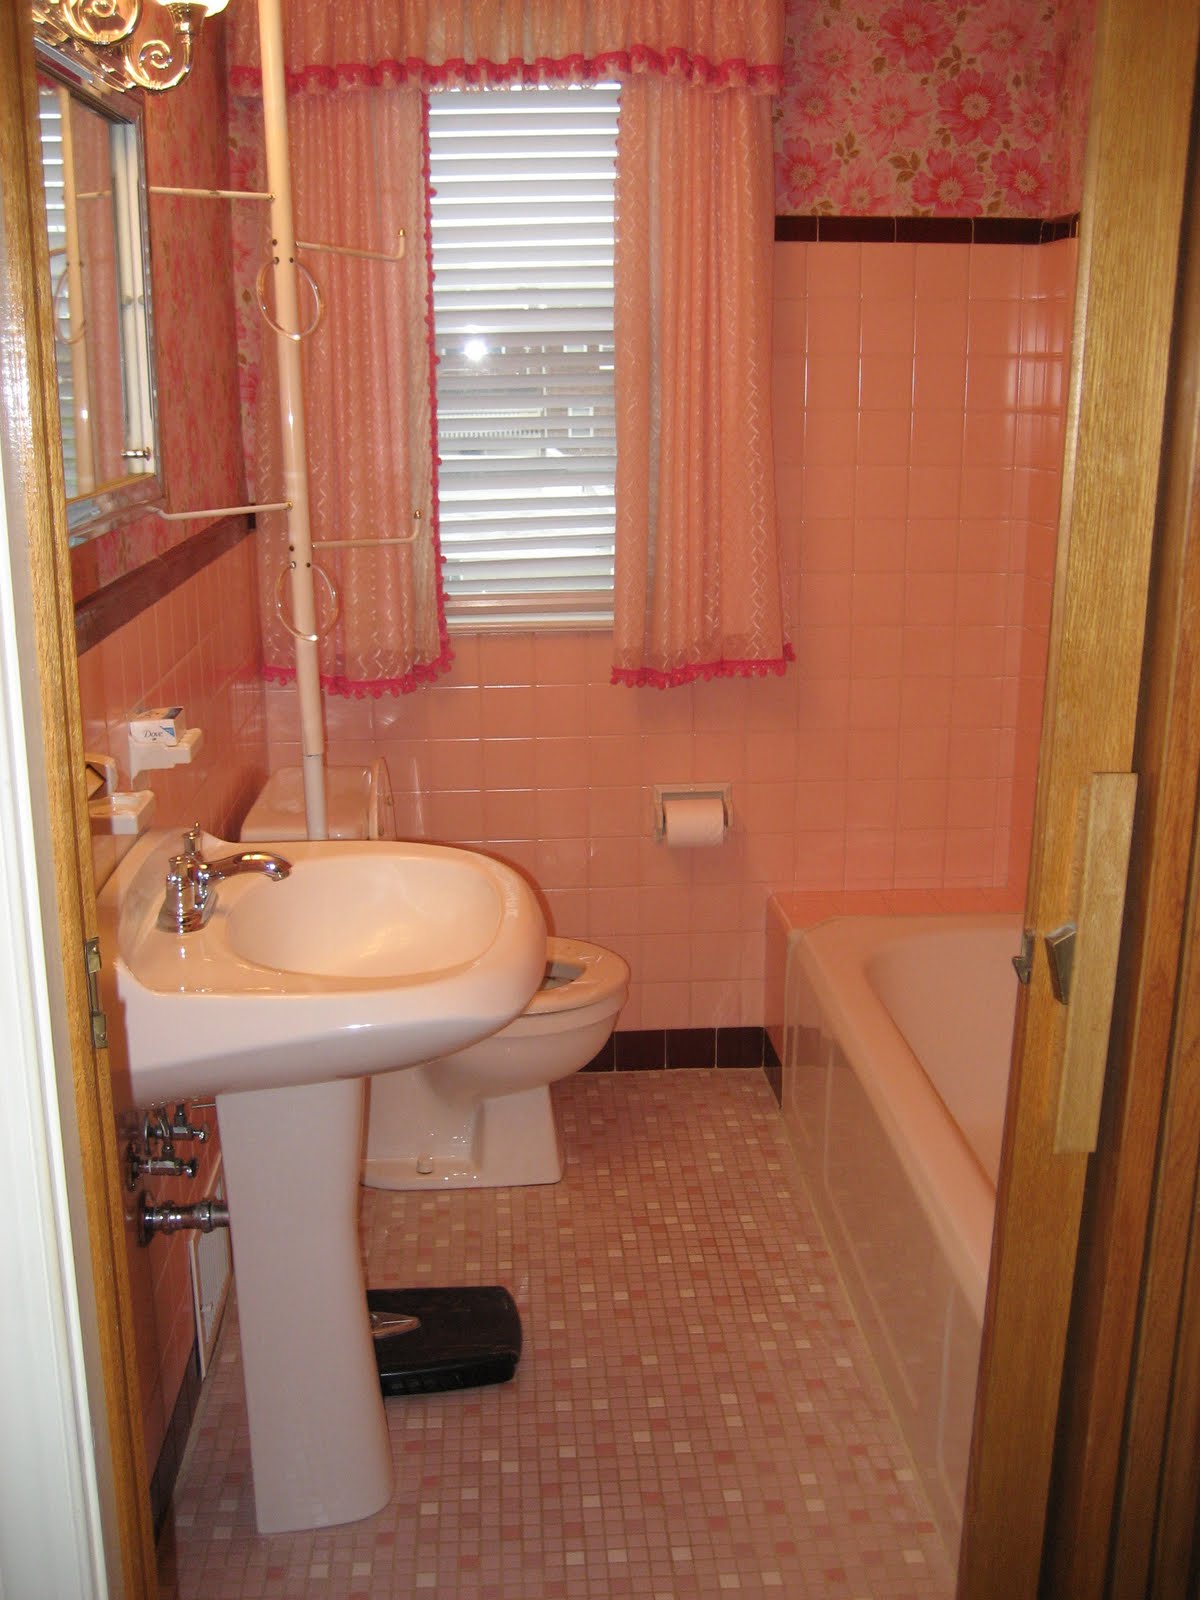 Take a look at our bathroom as it looked when we bought our home...